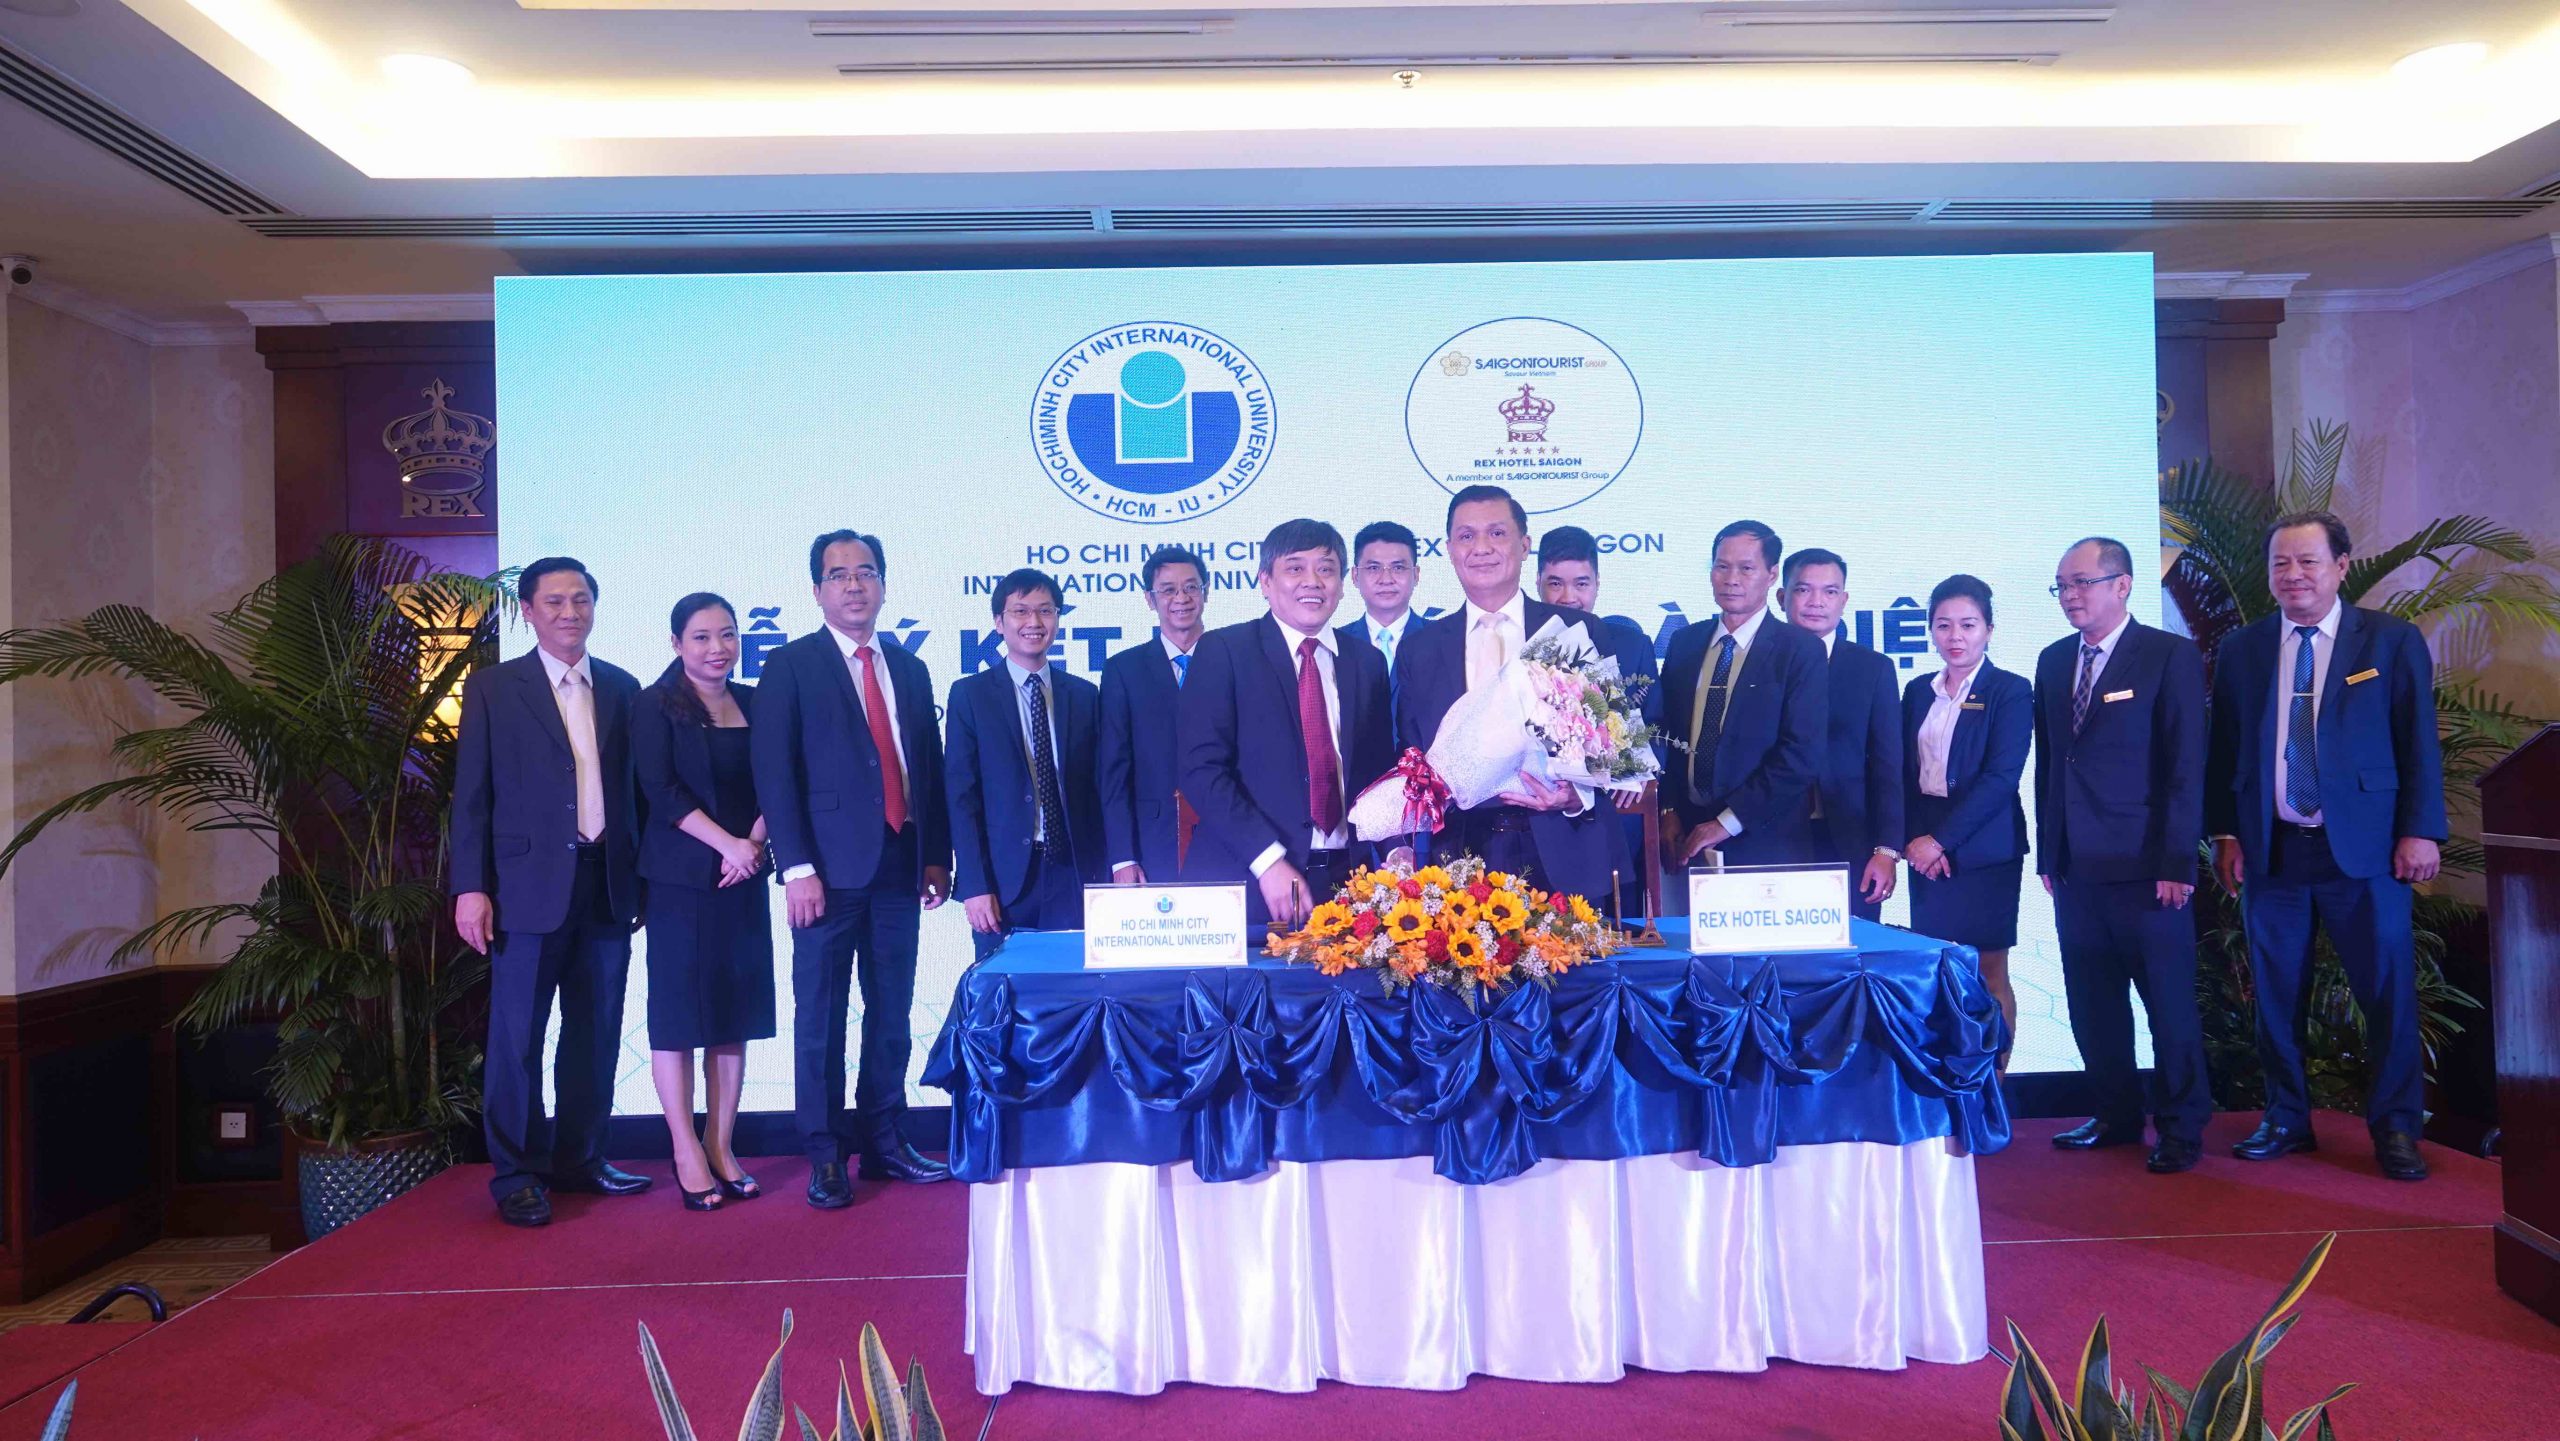 INTERNATIONAL UNIVERSITY’S COLLABORATION WITH BEN THANH HOTEL (REX HOTEL)